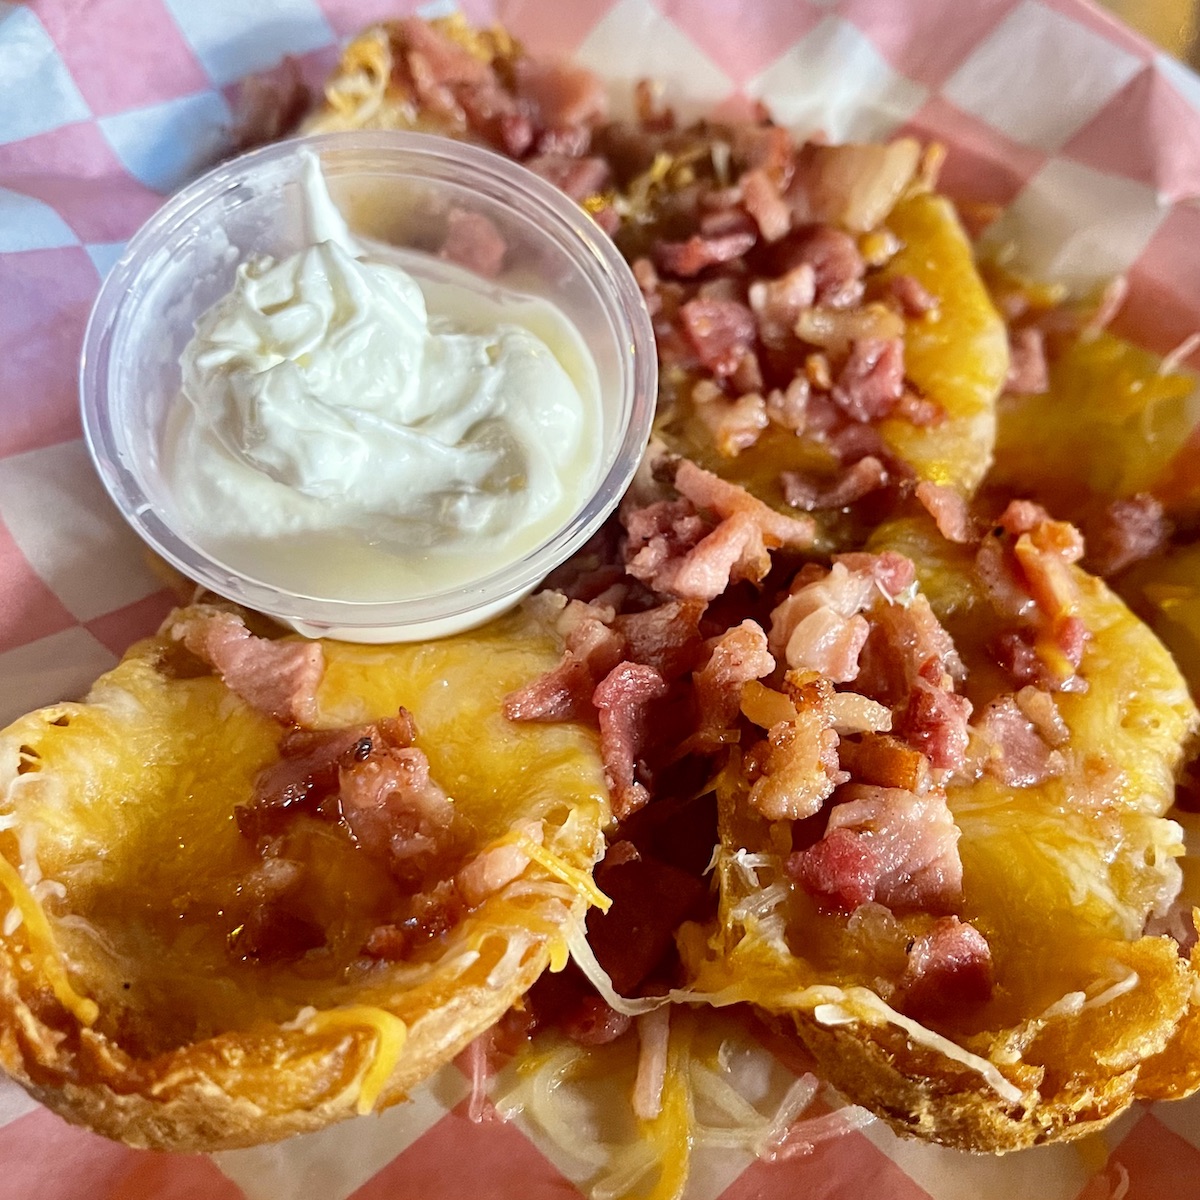 Potato Skins from Shorty's BBQ in Miami, Florida